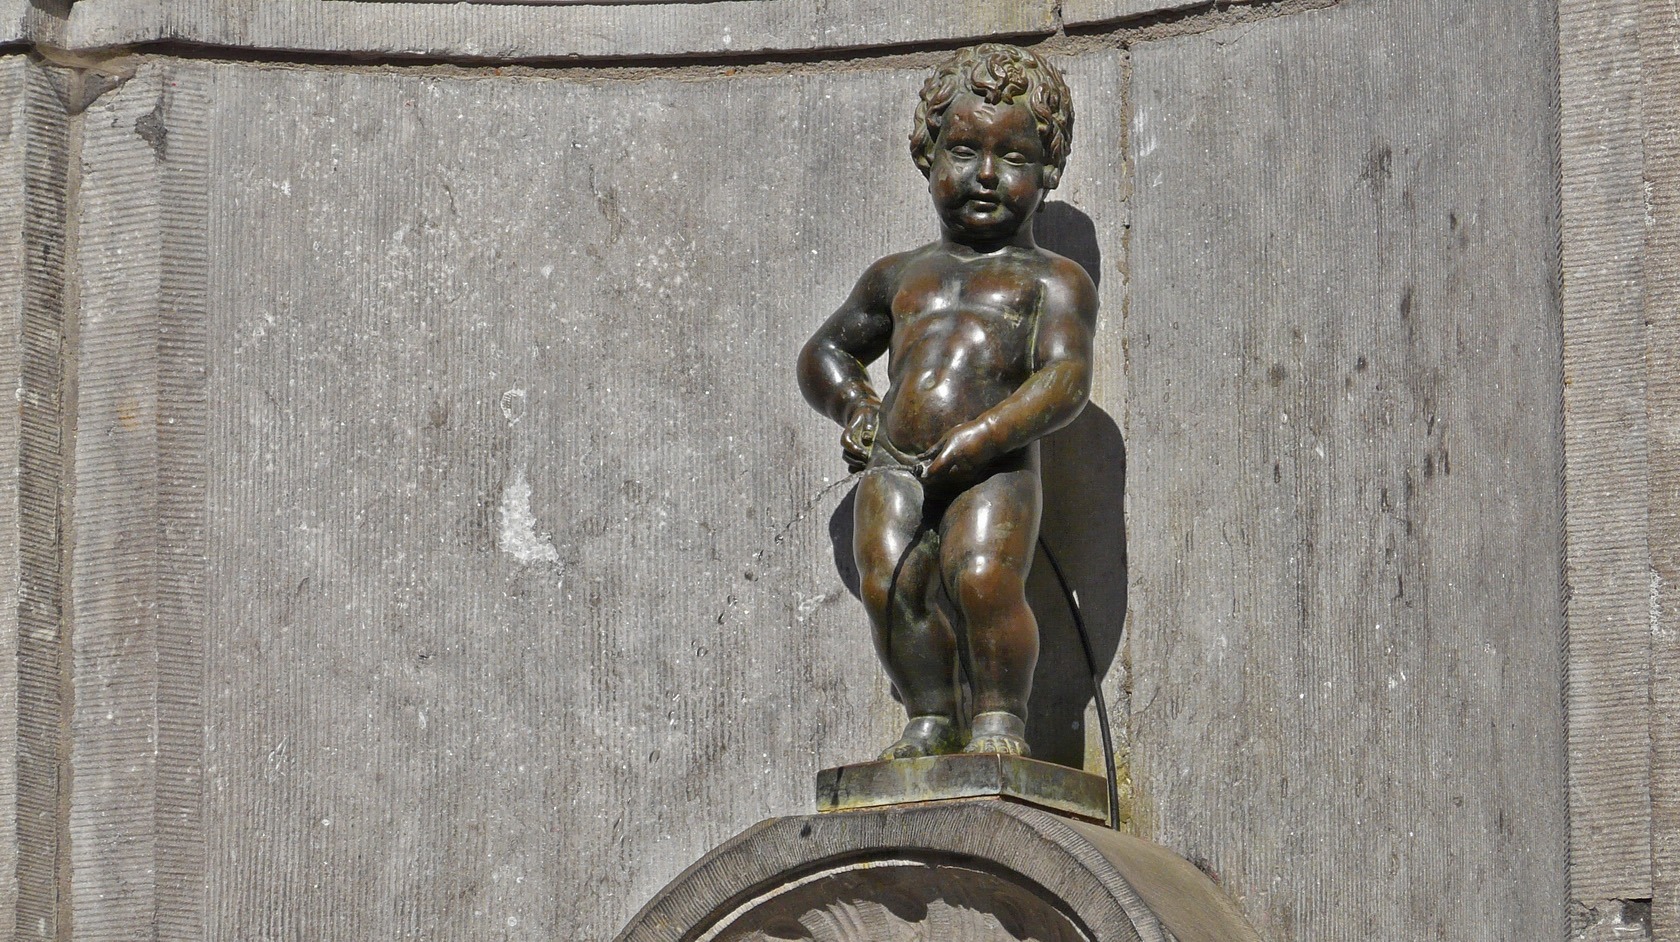 Manneken-Pis: The real story behind the iconic statue